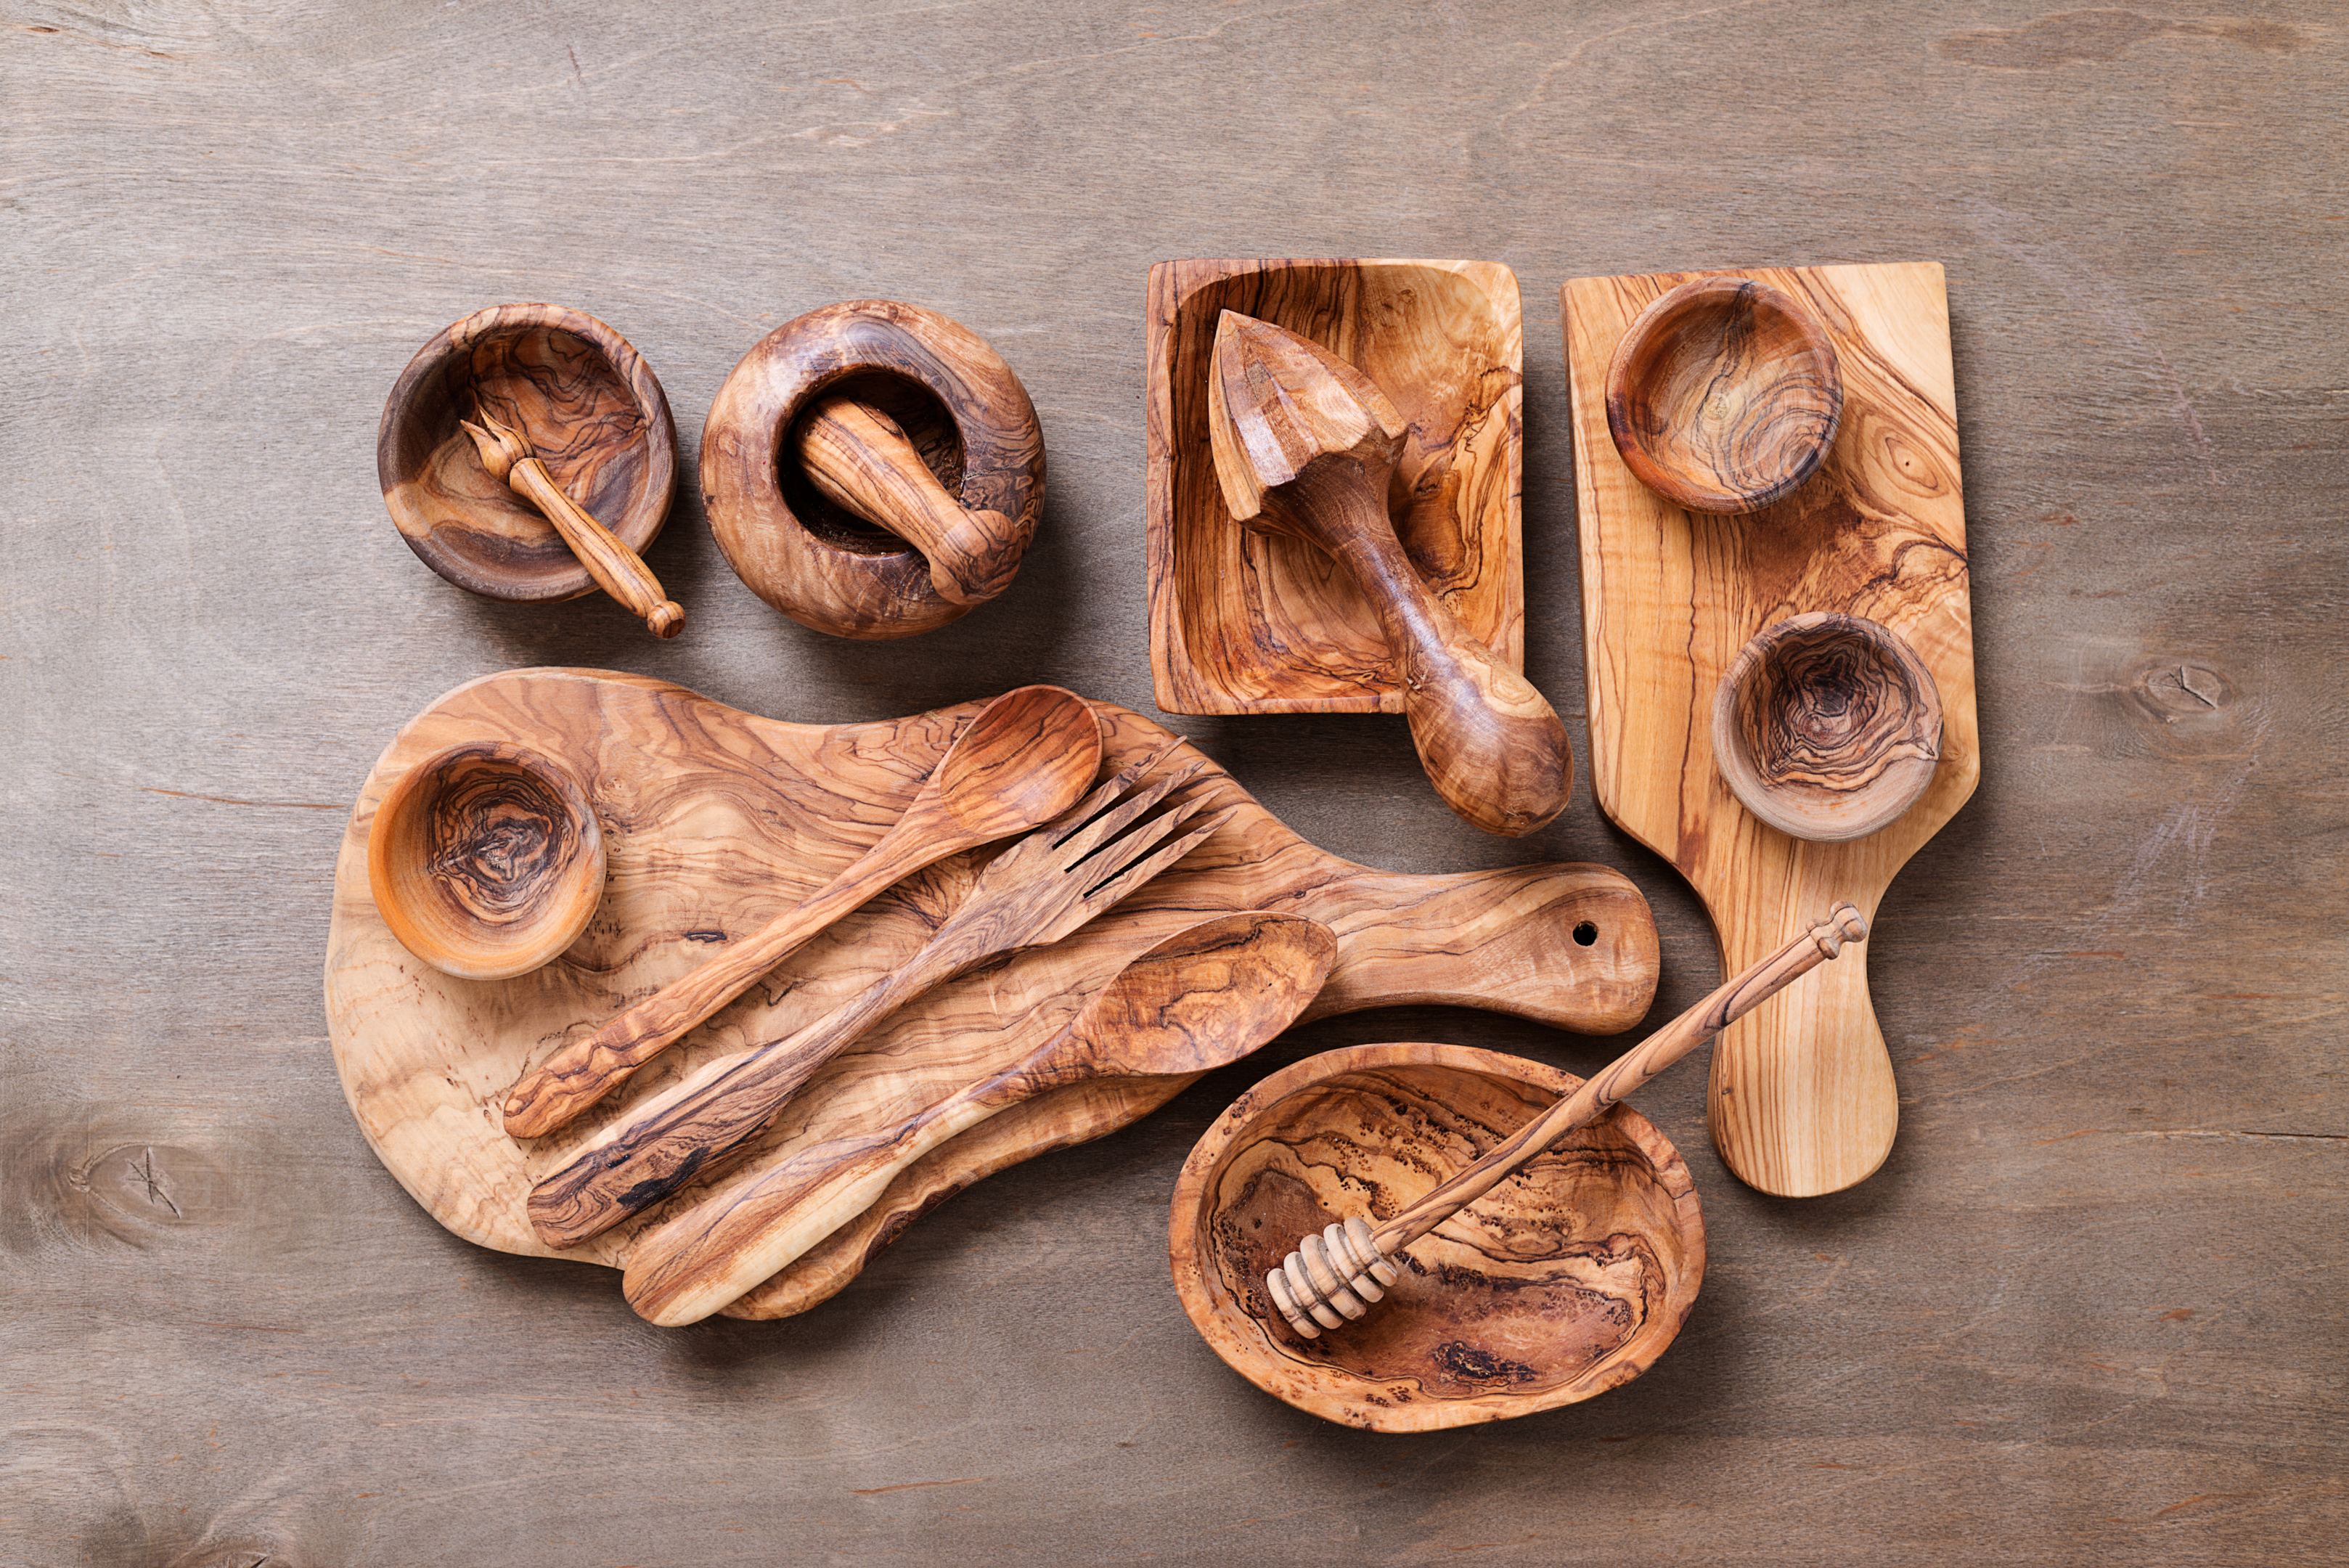 Olive wood carving spoons and other kitchenware